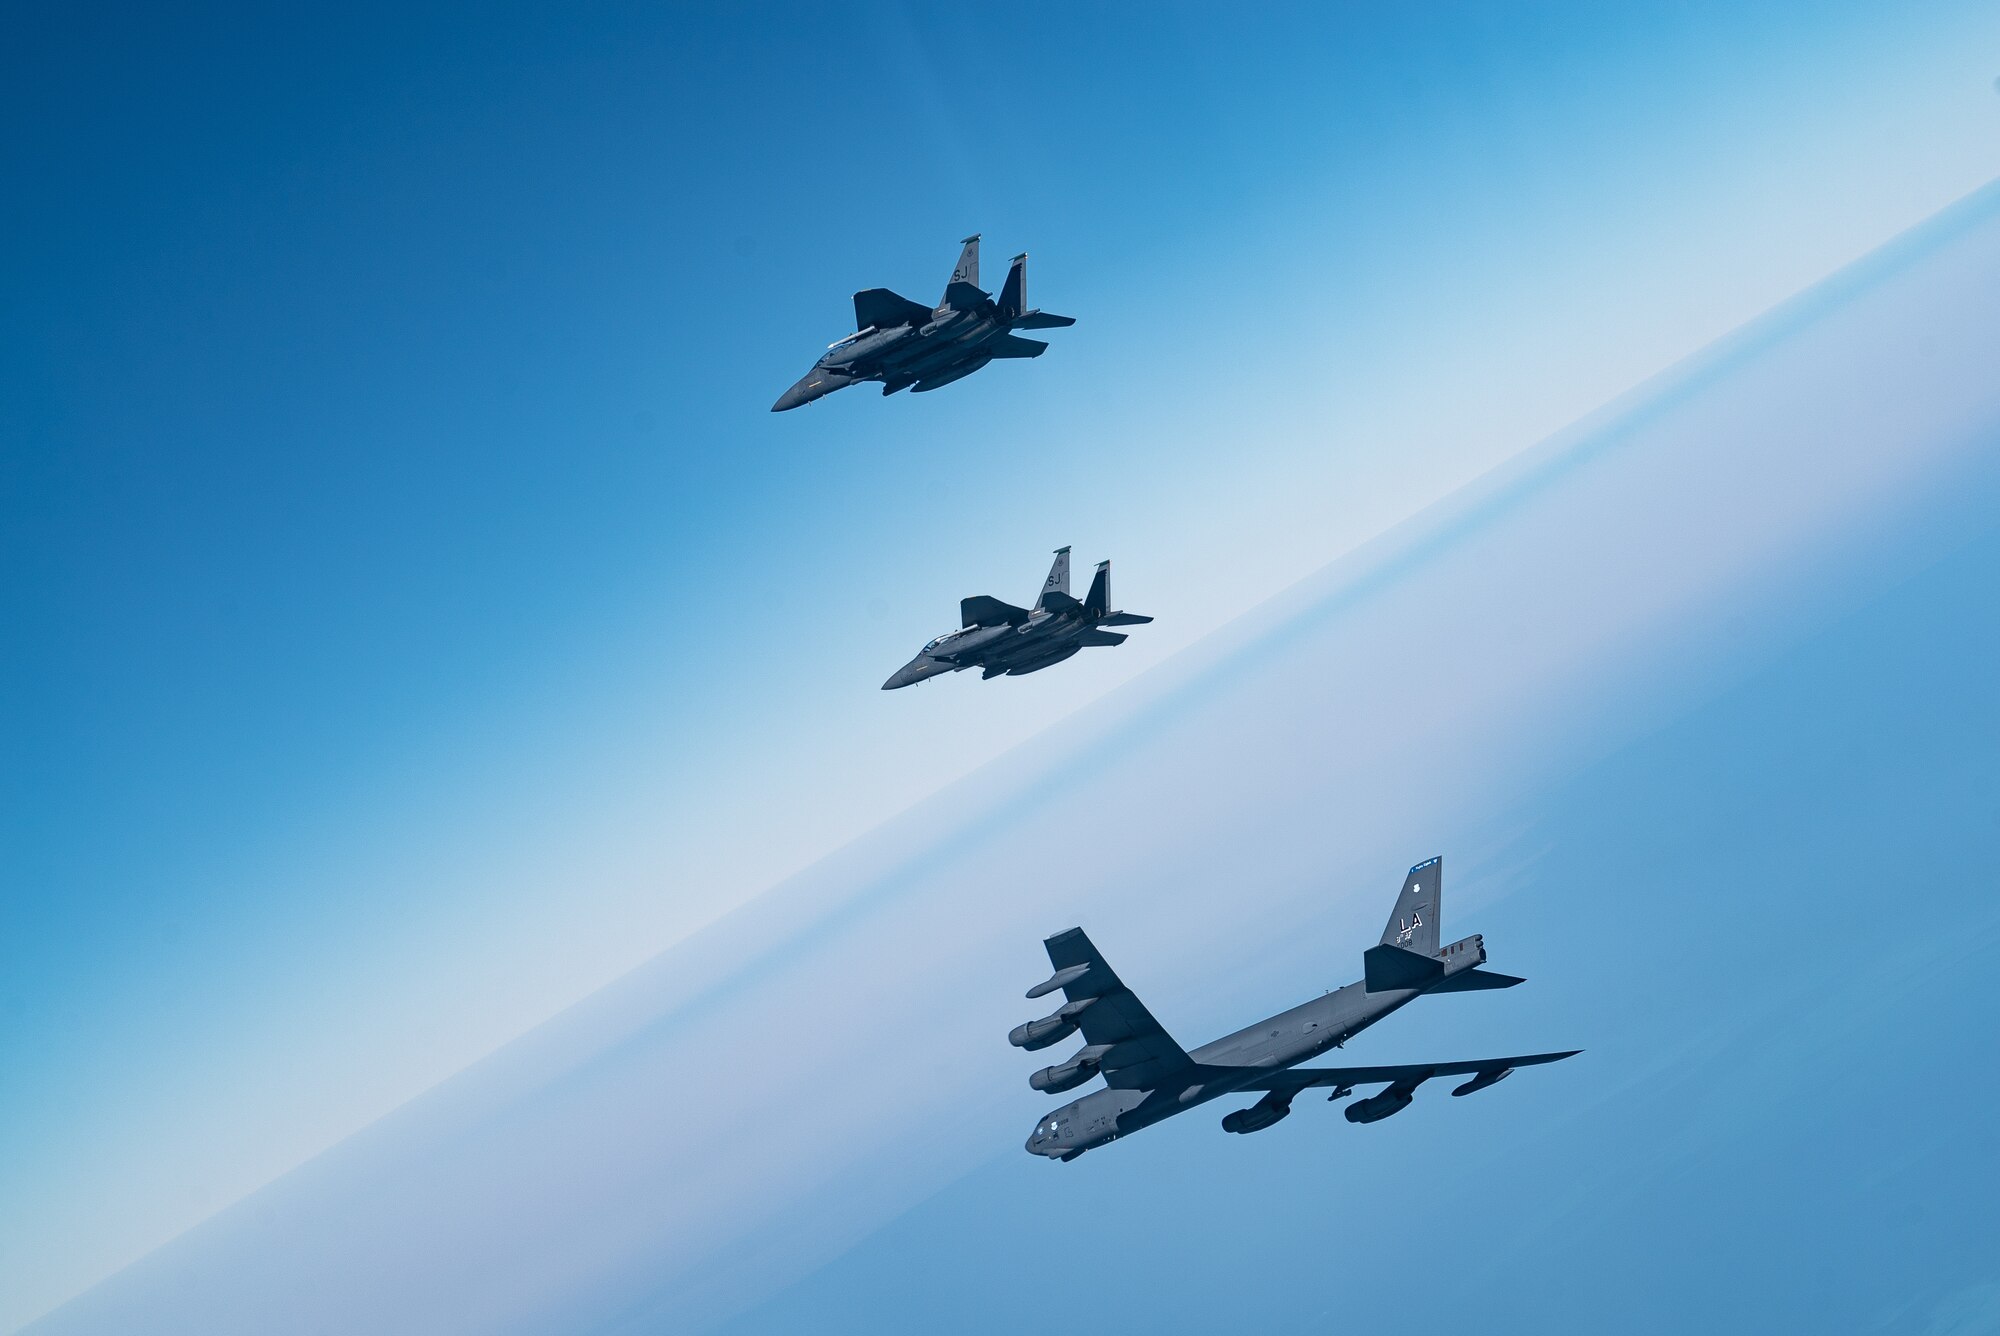 B-52 Stratofortresses fly in formation with U.S. Air Force F-15E Strike Eagles, Saudi Royal Air Force fighter jets, and U.S. Navy F/A-18 Hornets